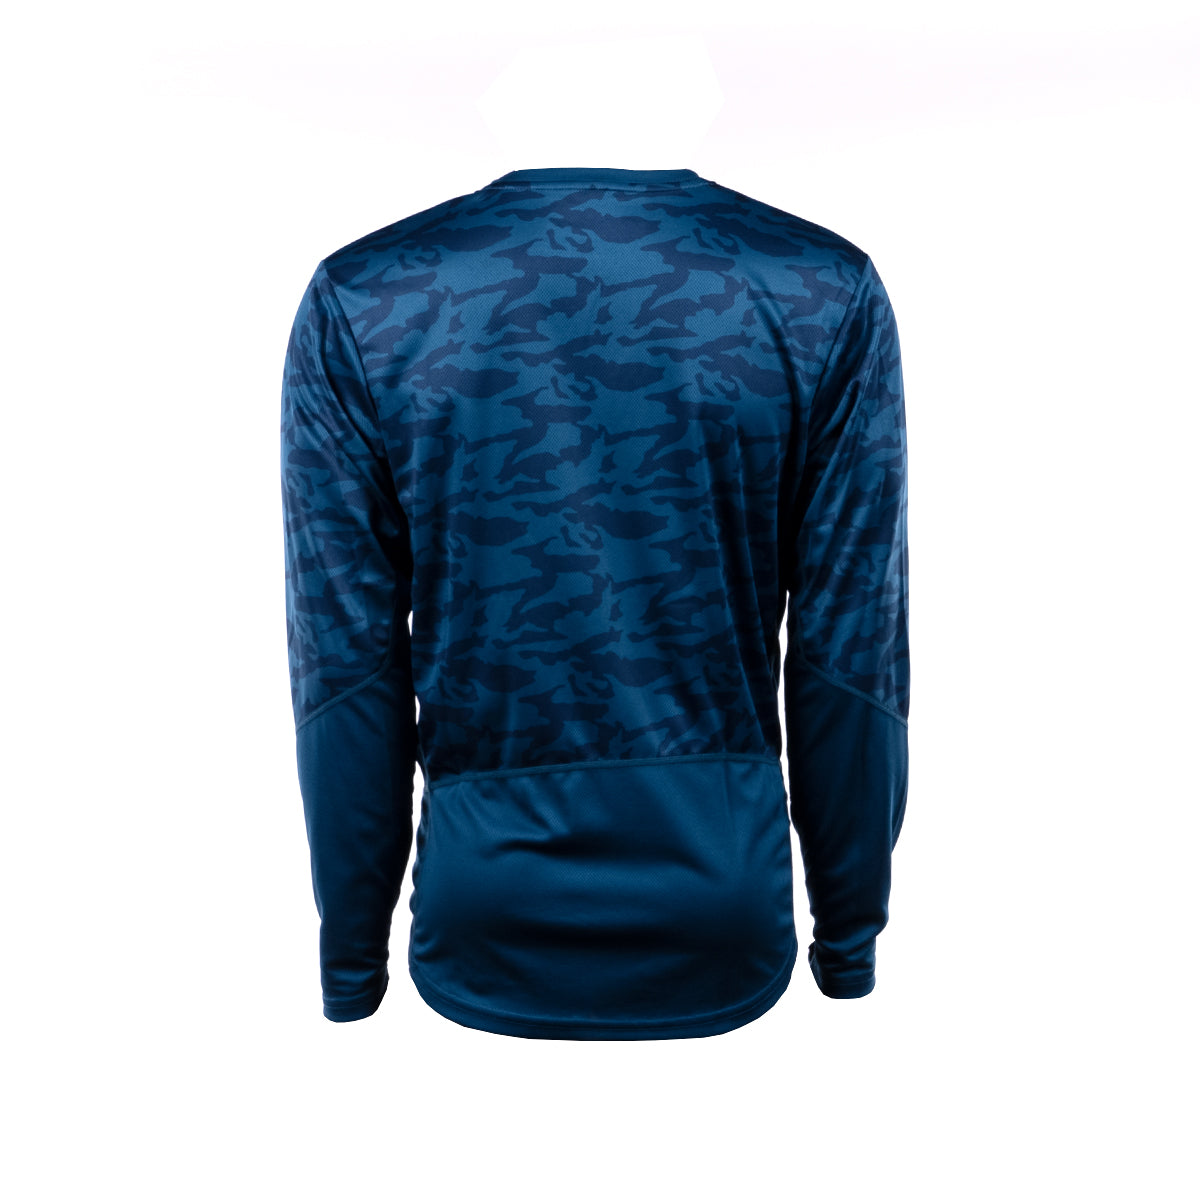 On-One MX Long Sleeve Trail Jersey Men’s Navy